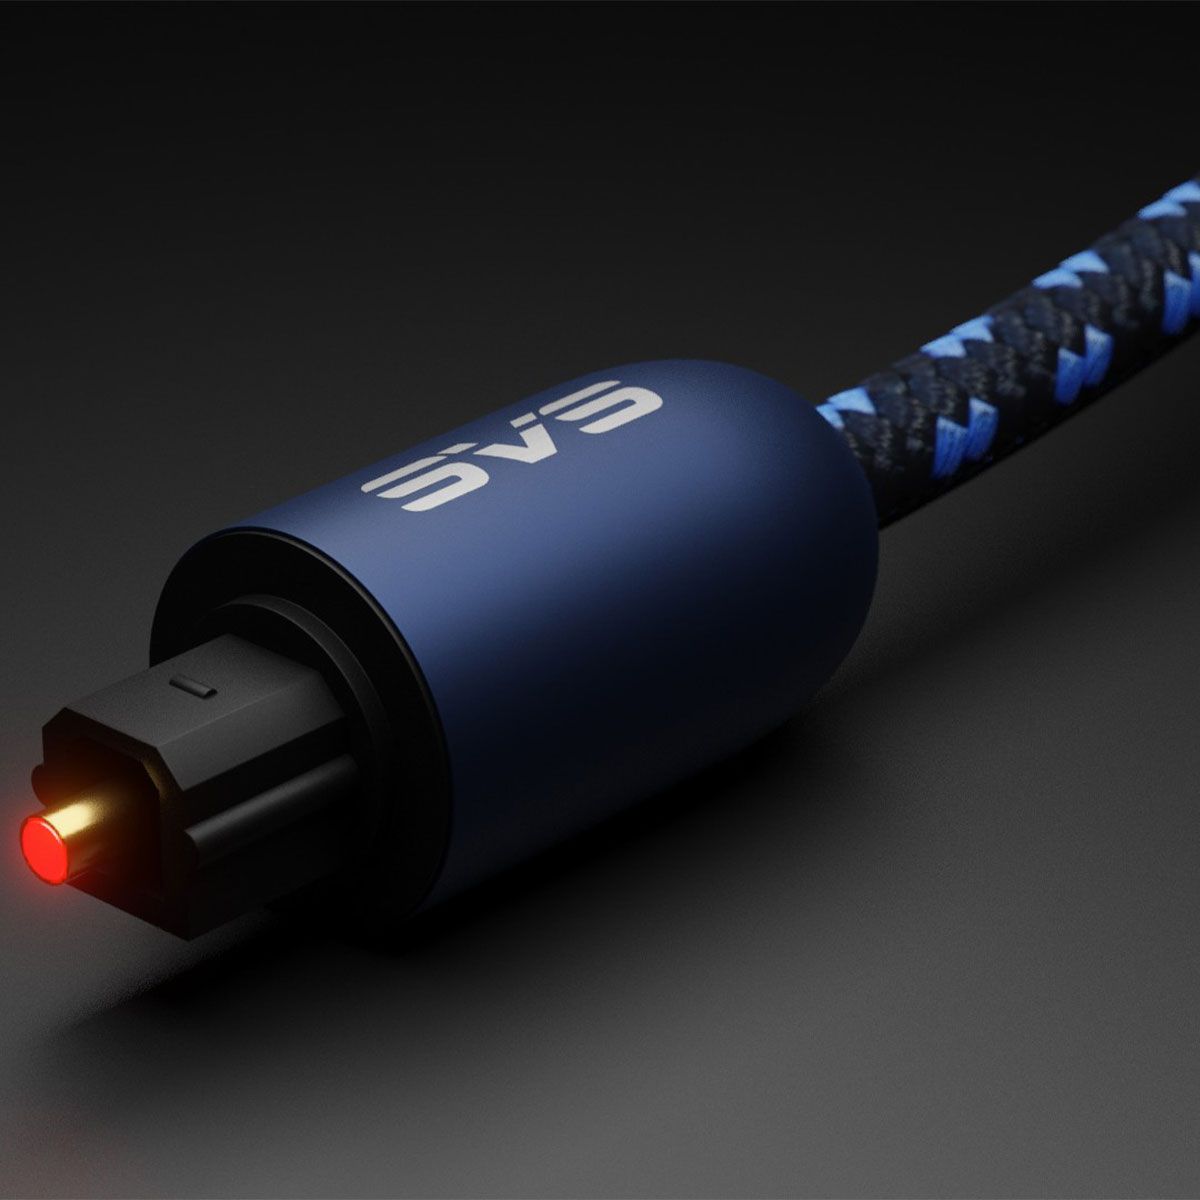 SVS SoundPath Digital Optical Cable - close-up of termination